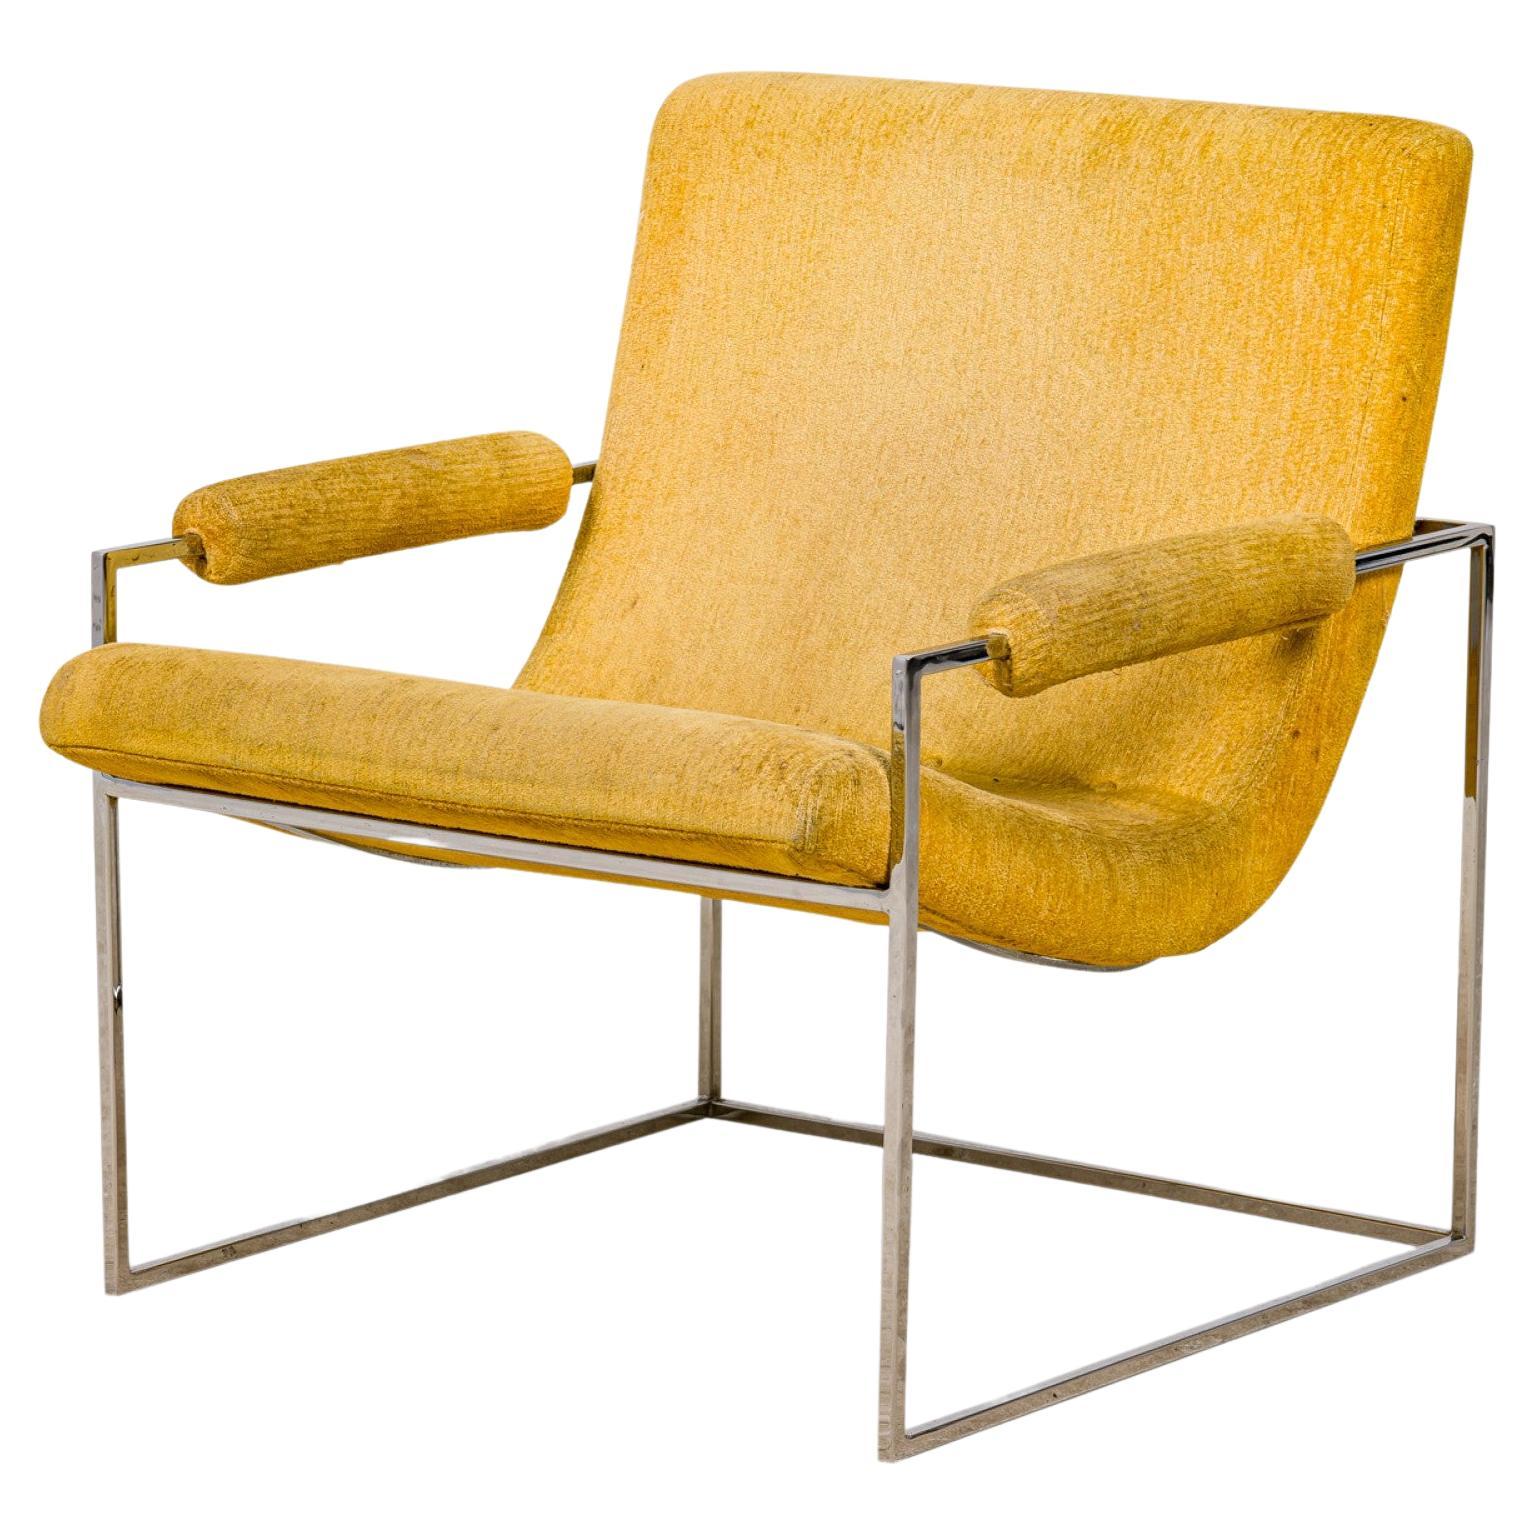 Milo Baughman for Thayer Coggin Pale Yellow Upholstered Scoop Lounge / Armchair